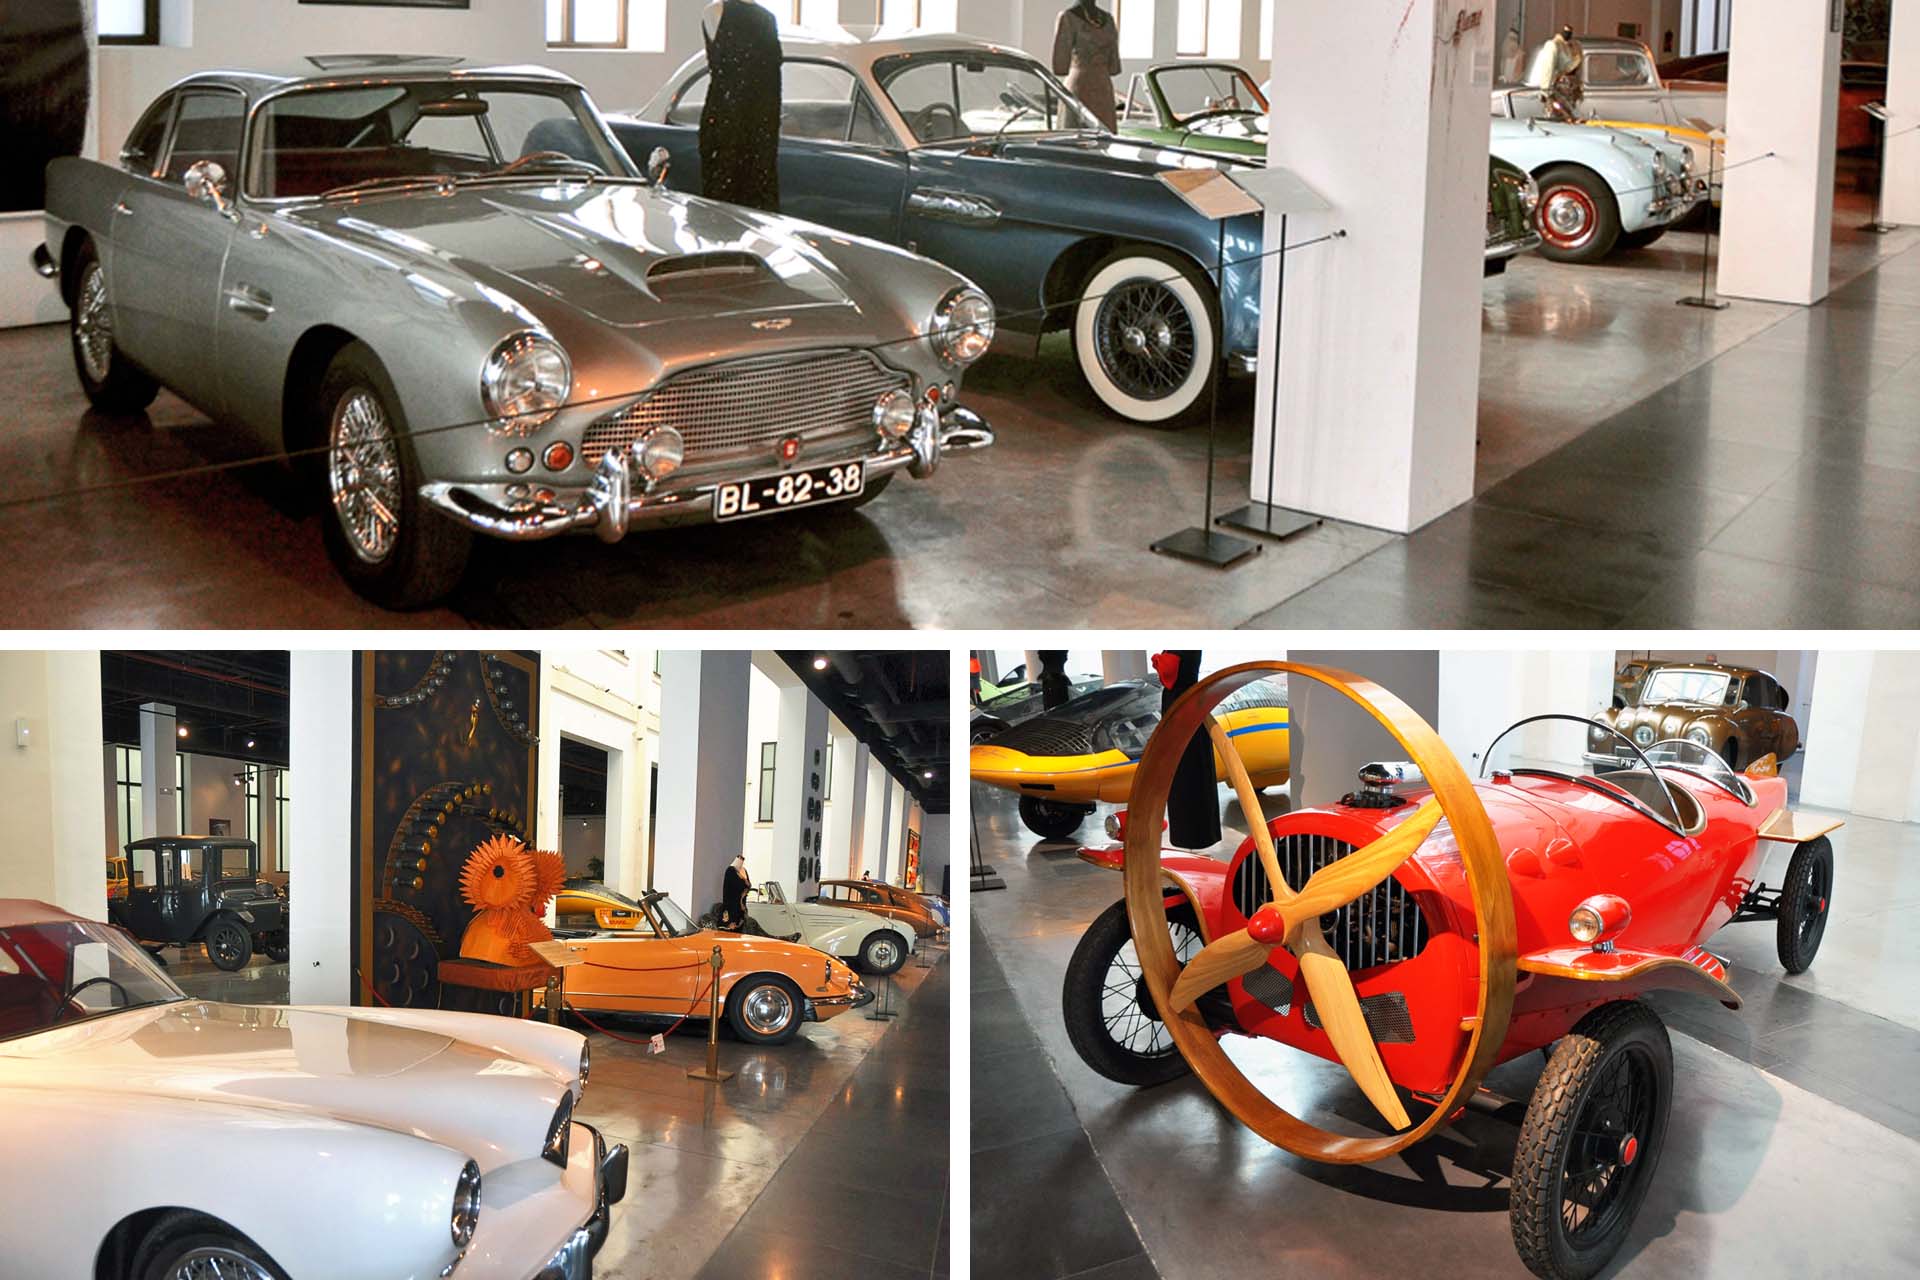 The museum's current exhibition focuses on car design, so it wasn't much of a stretch for Mercedes-Benz – who have been working hard on the design of the new car – to locate its C-Class coupes at the museum's front door. Before we move on to the Coupé exclusively, here are a couple of pictures of the museum's interior.